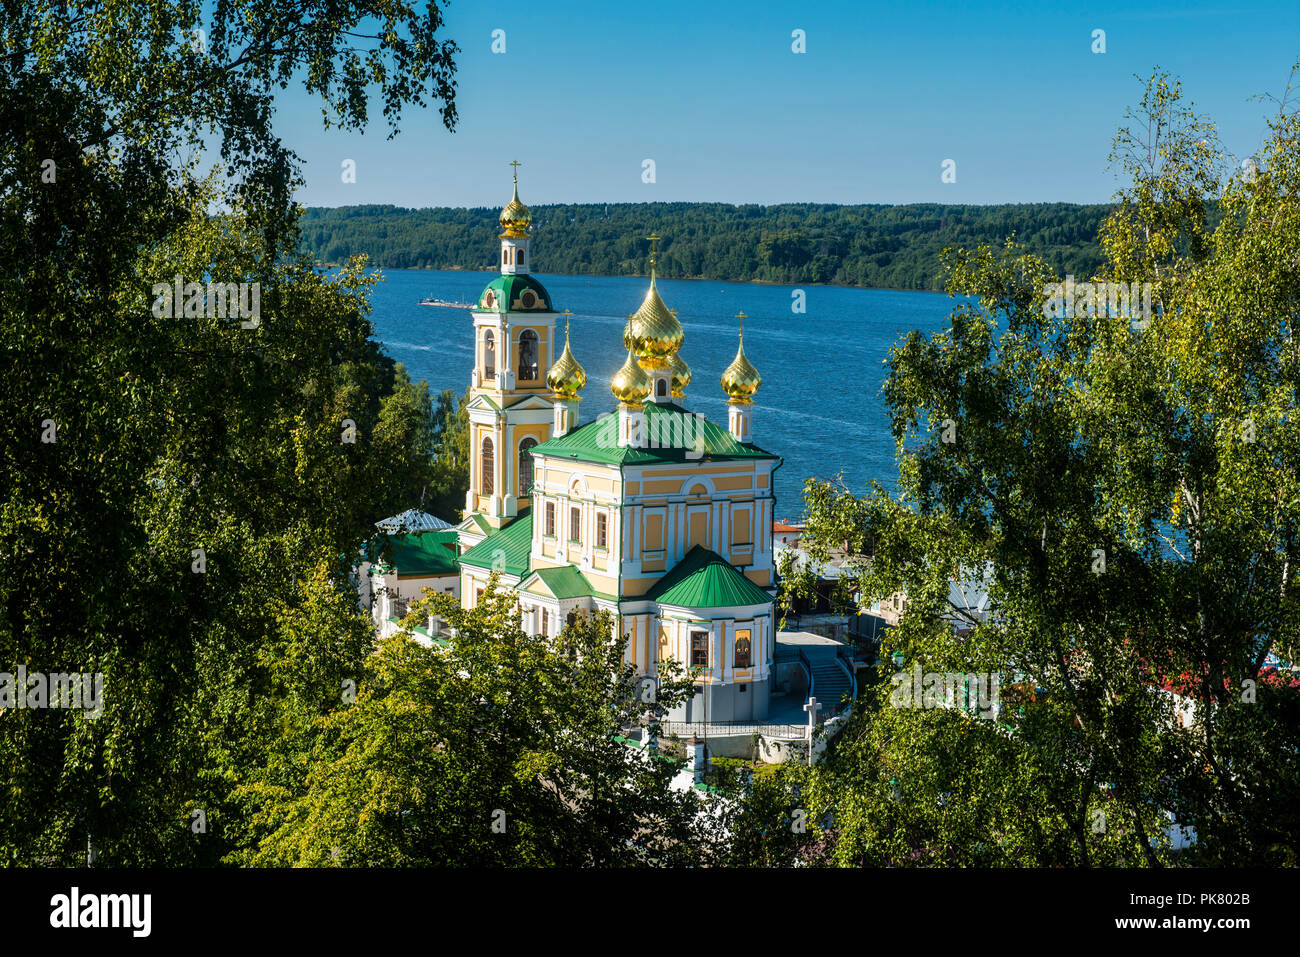 Overlook over an orthodox church and the volga river, Plyos, Golden ring, Russia Stock Photo